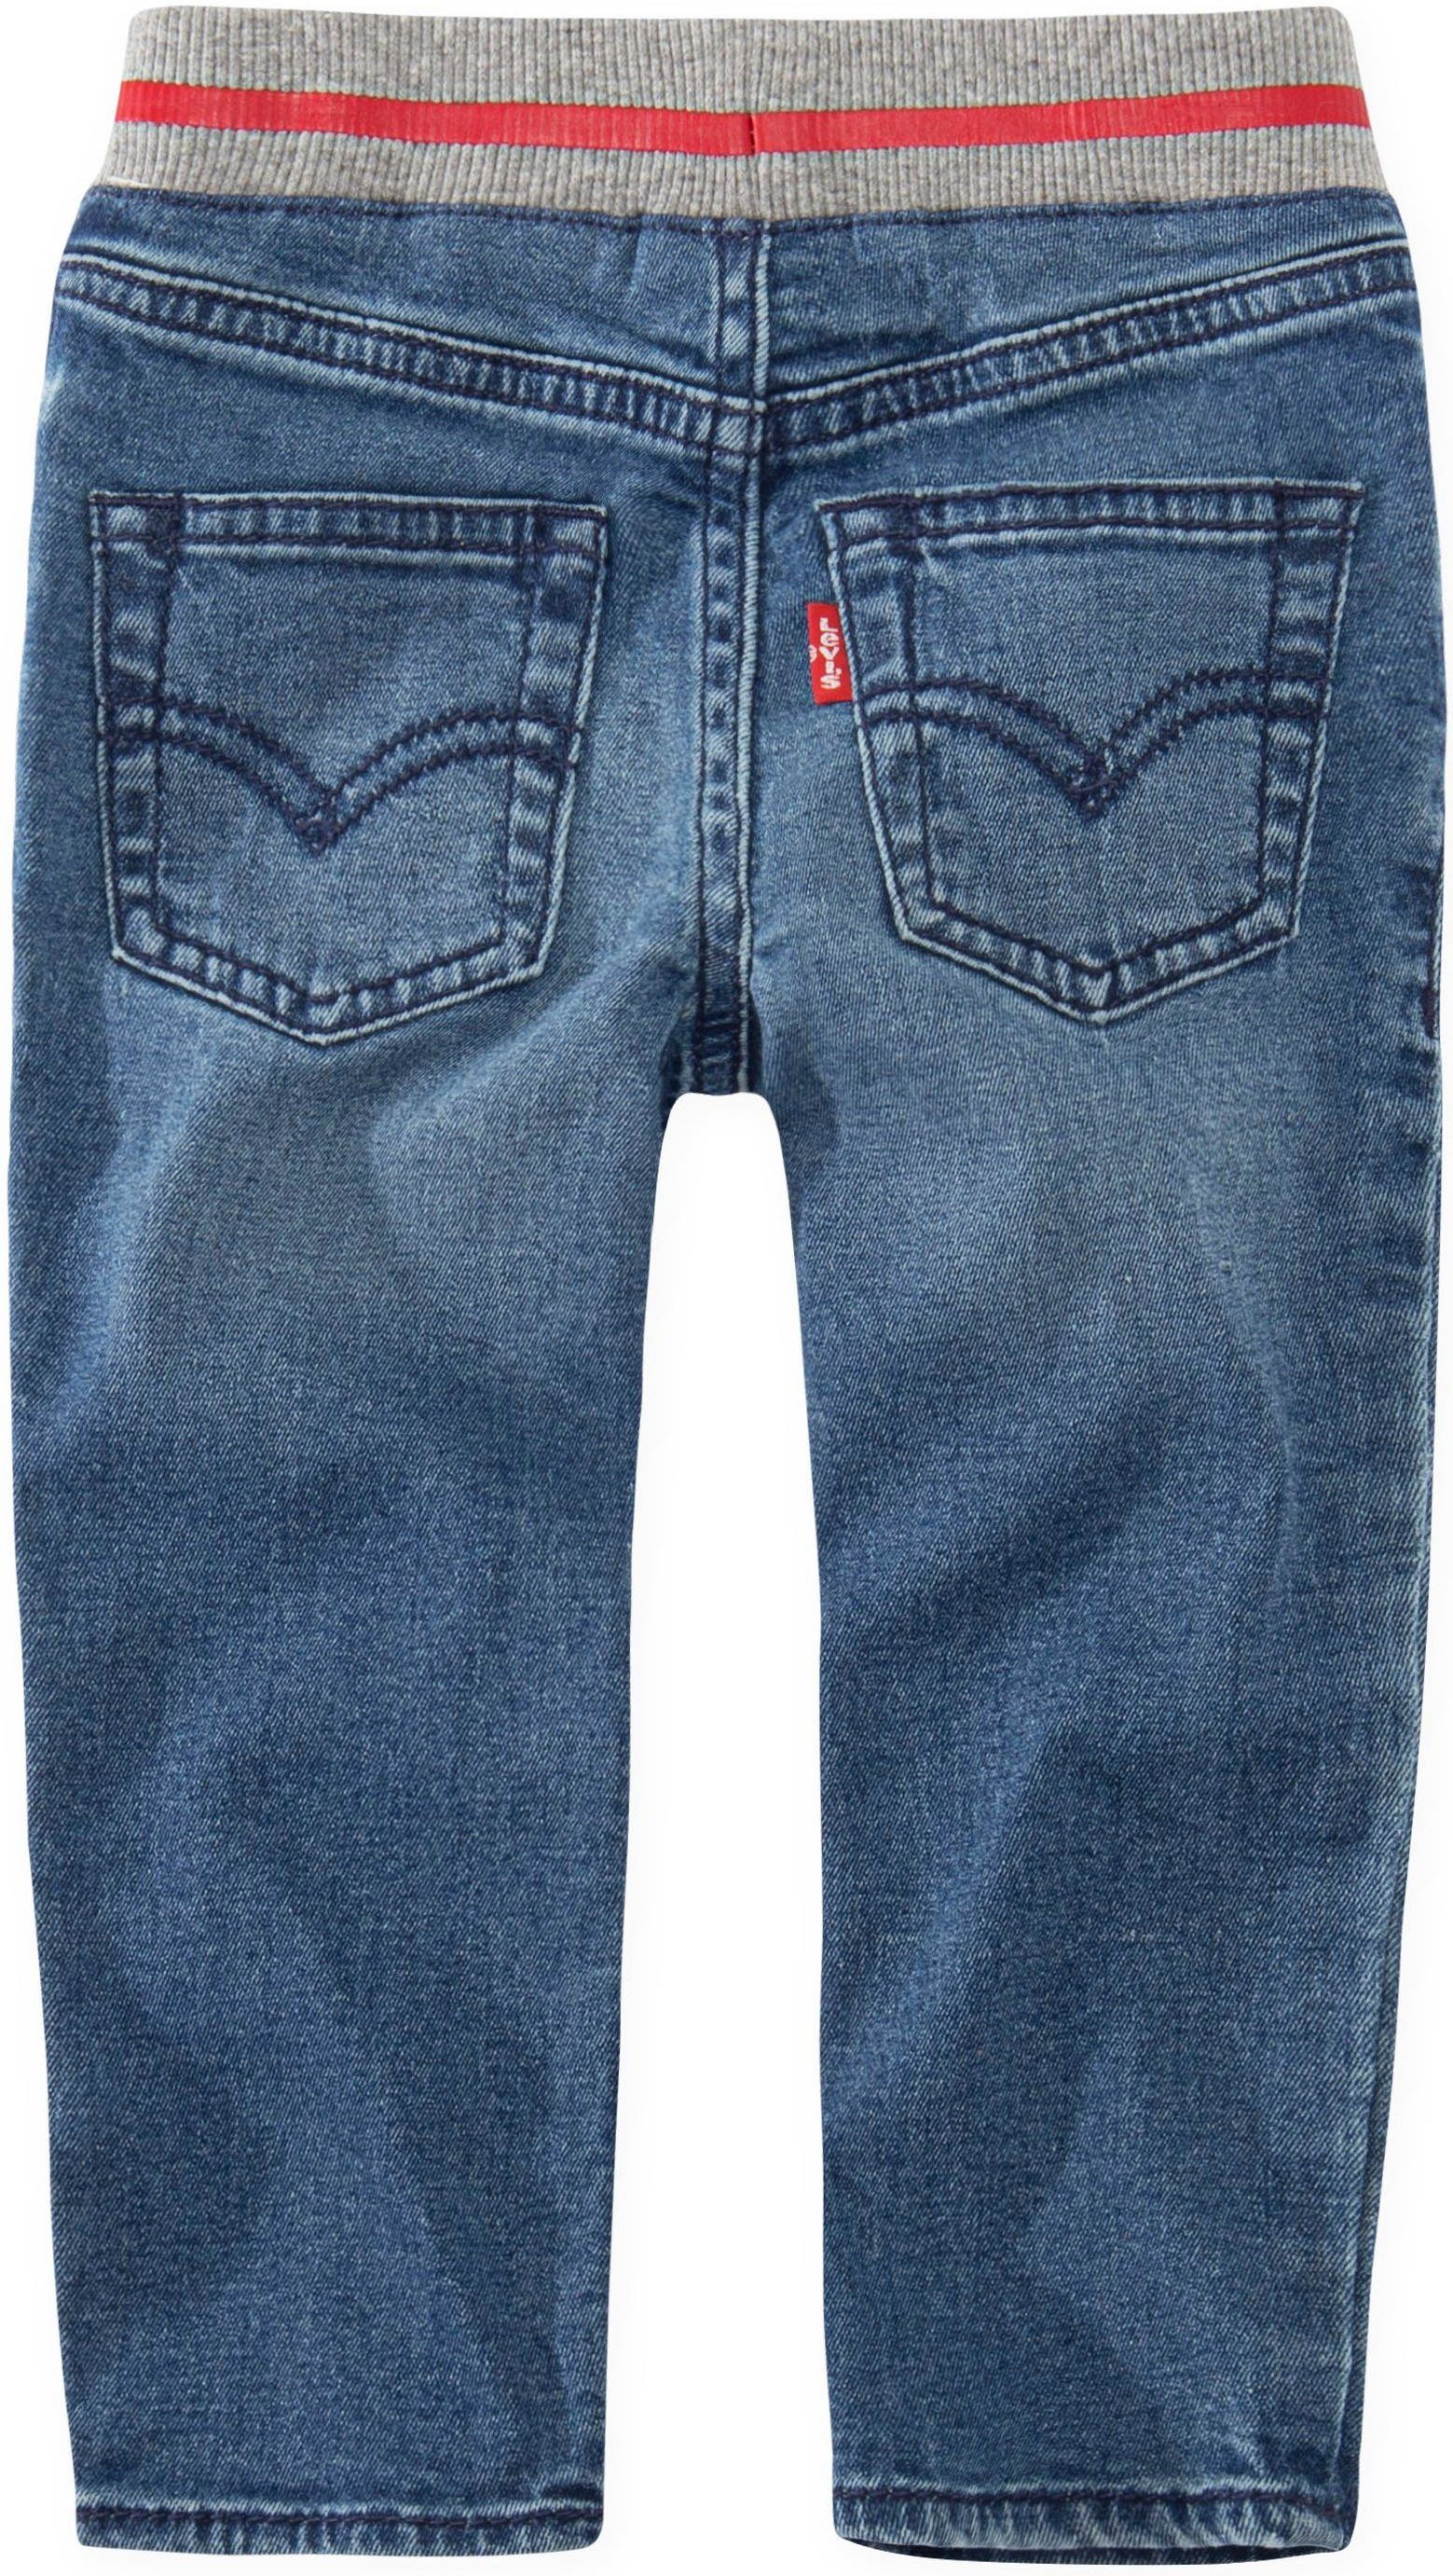 ON Kids JEANS Levi's® blue used BOYS Baby Schlupfjeans SKINNY for PULL